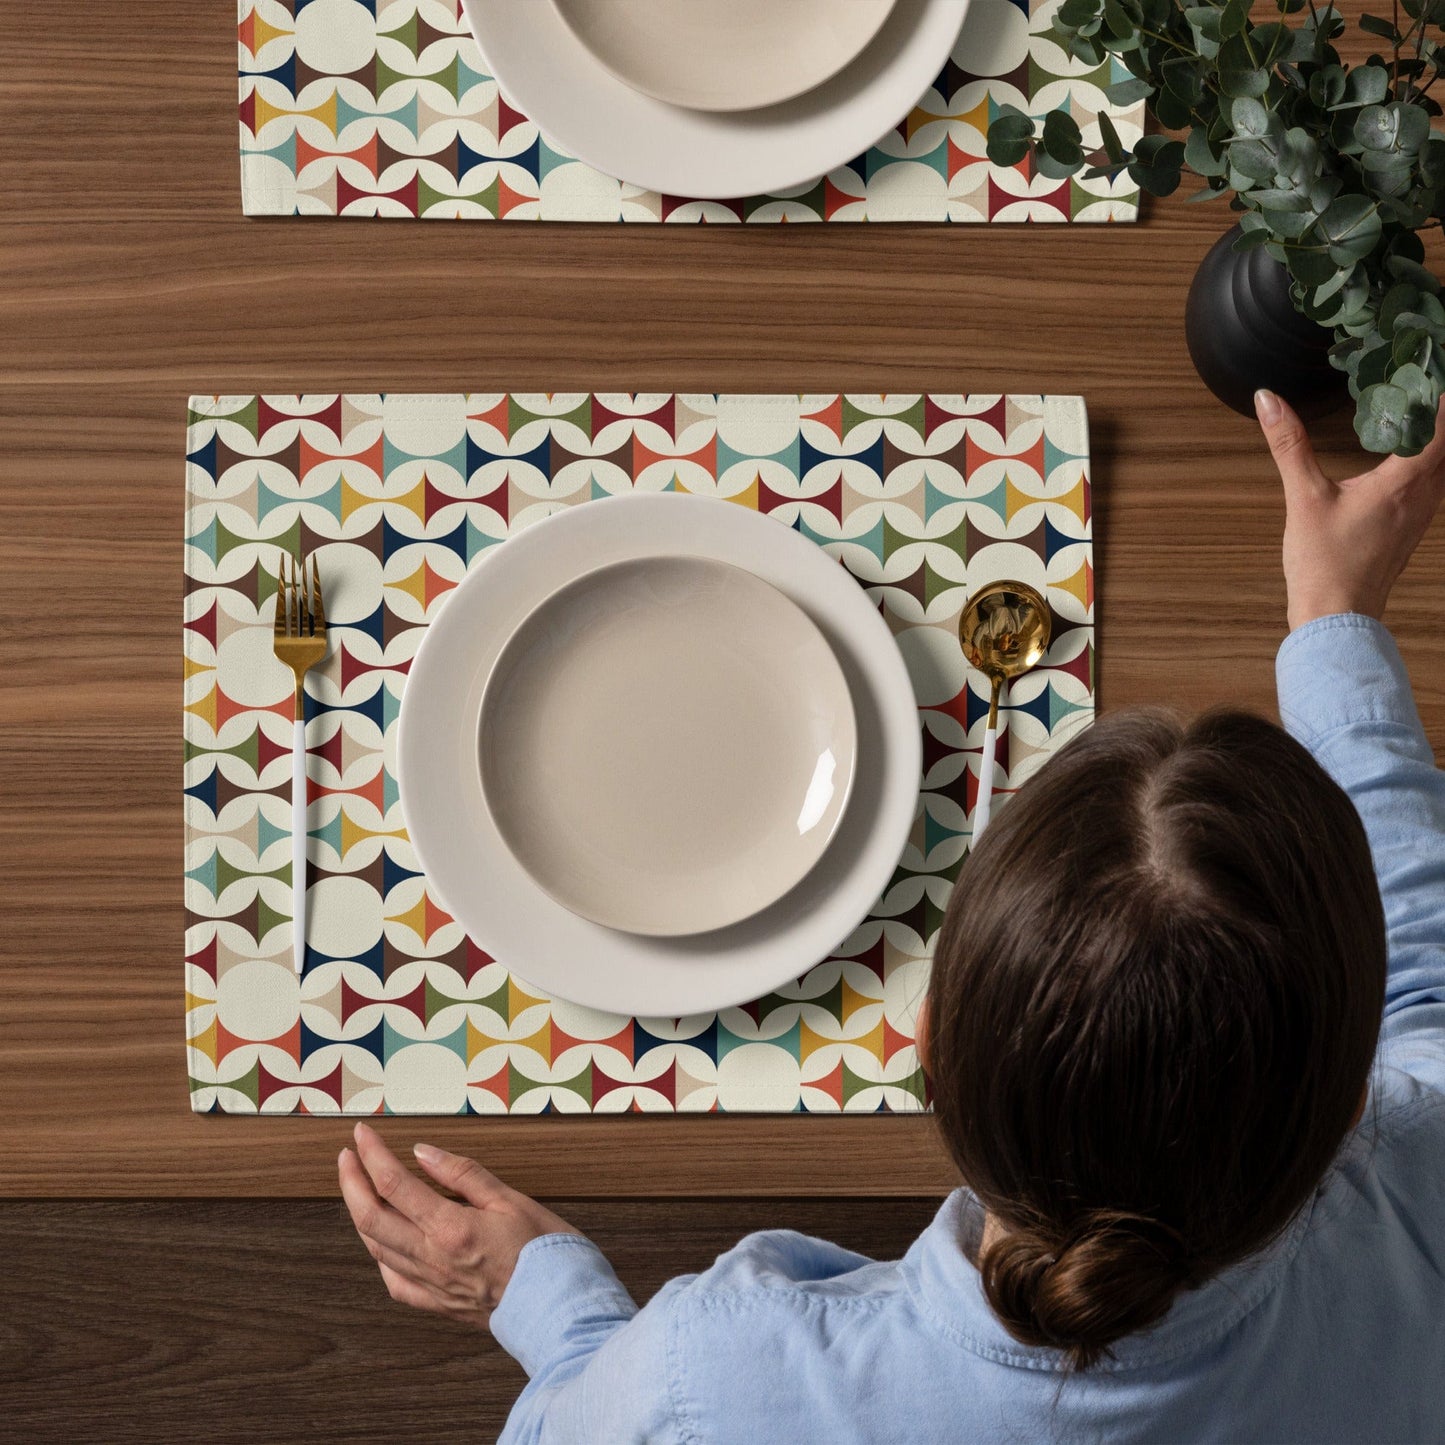 Kate McEnroe New York Set of 4 Mid Century Modern Retro Geometric Placemats, 50s MCM Cream, Teal, Mustard, and Rust Table Mats Placemats 2249194_17484